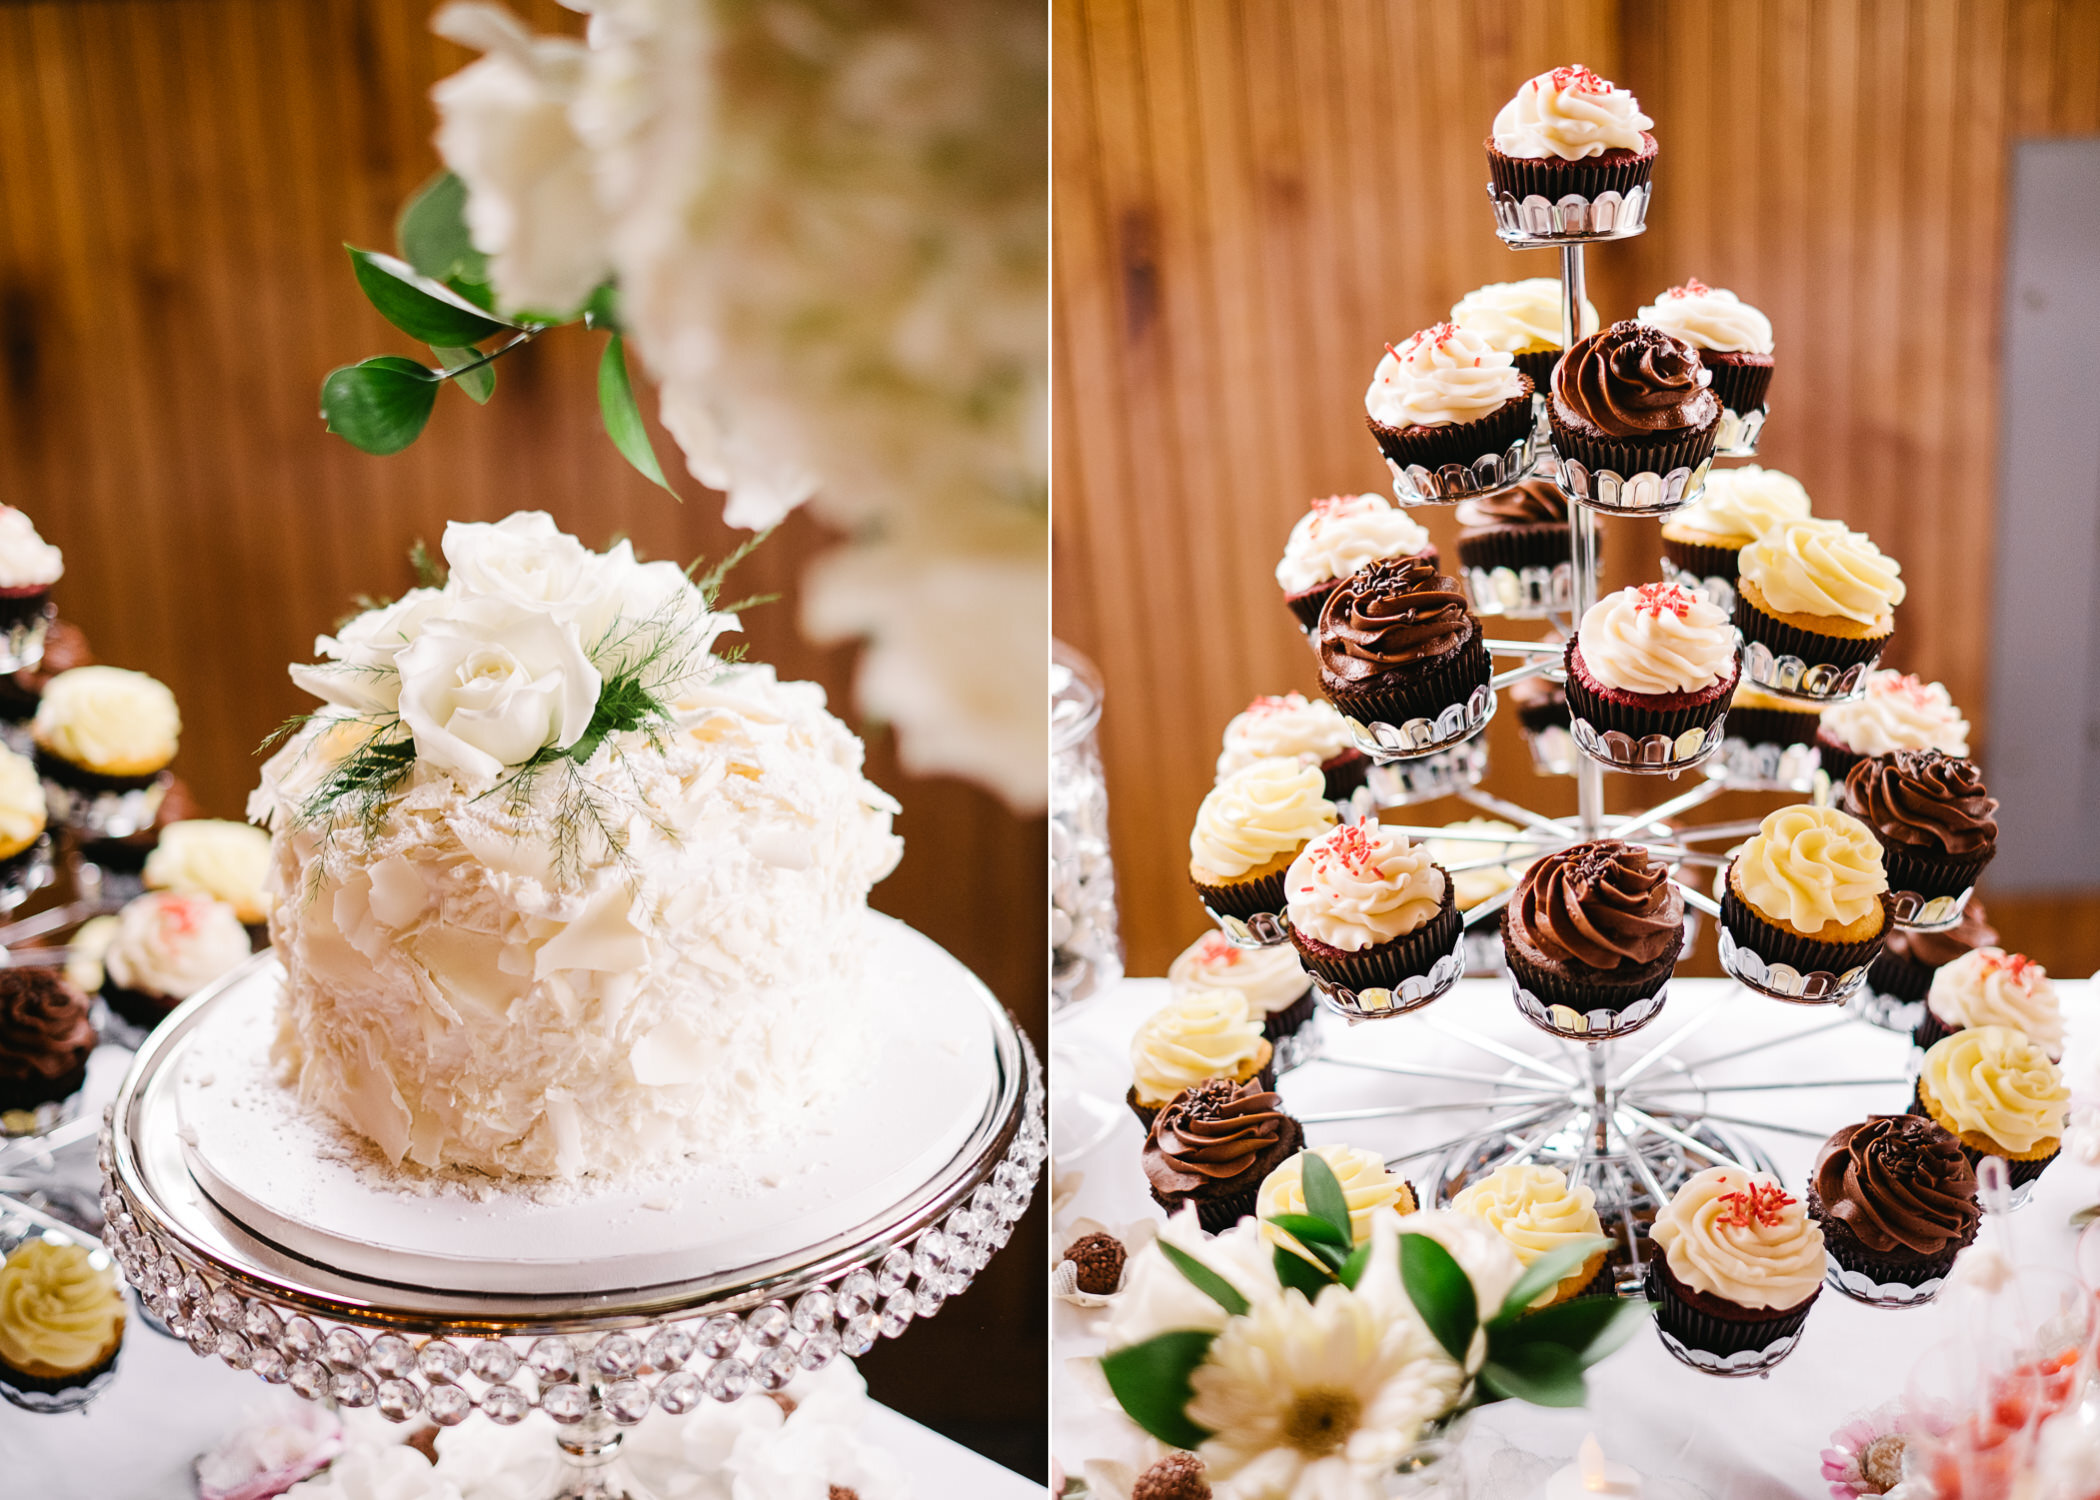  Cupcakes with pink sprinkles and white wedding cake with white roses 